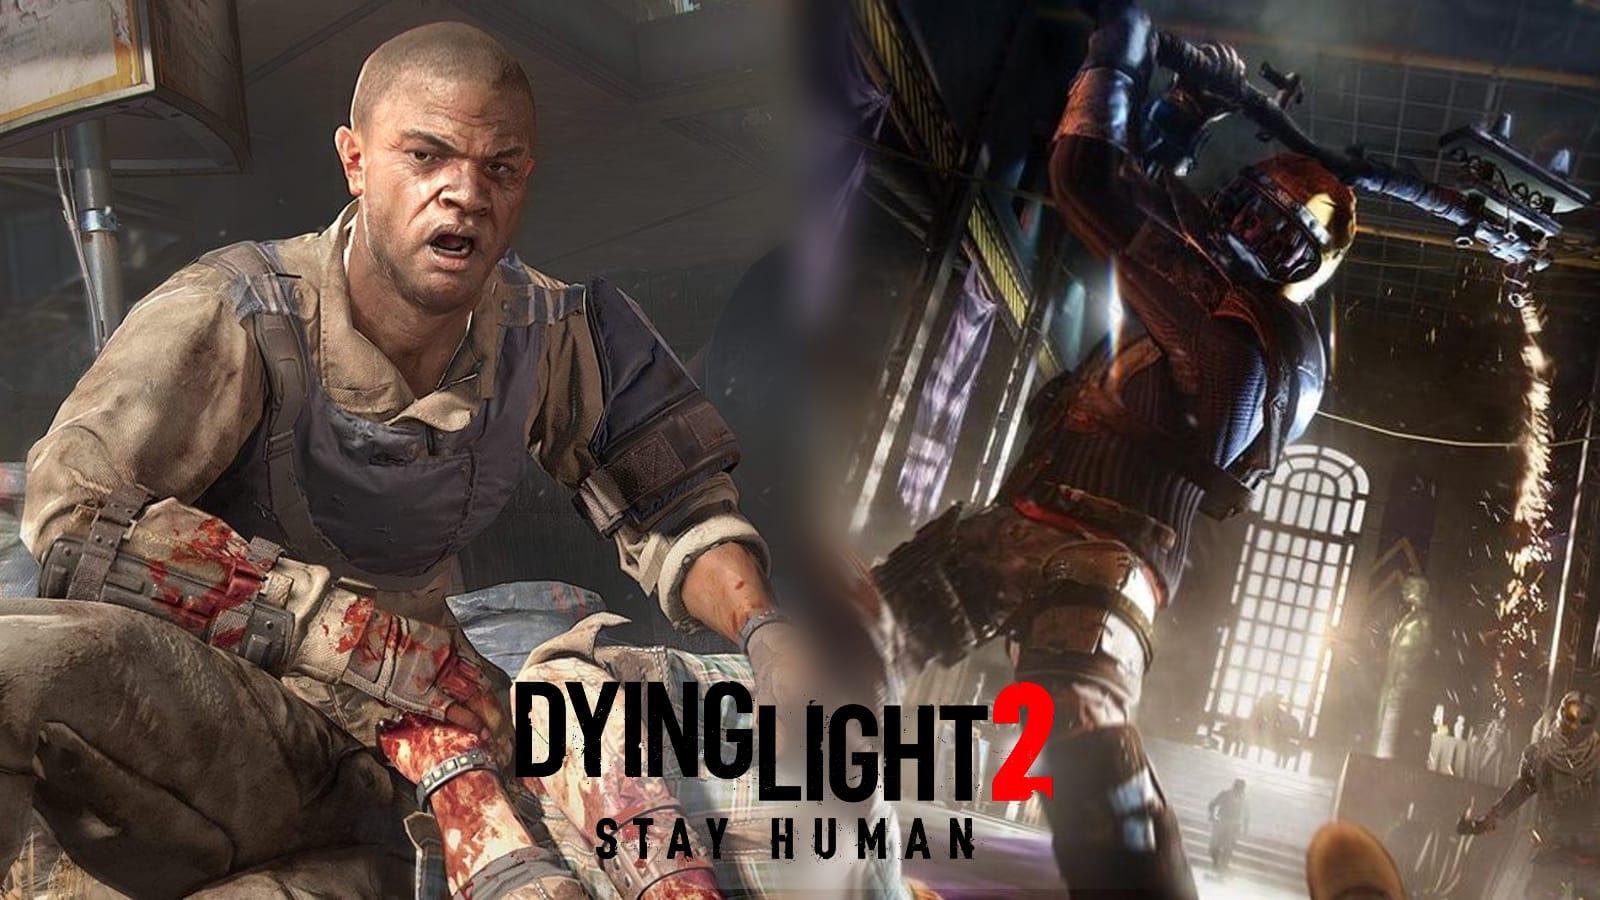 Dying Light 2 Stay Human review: Surviving on the edge